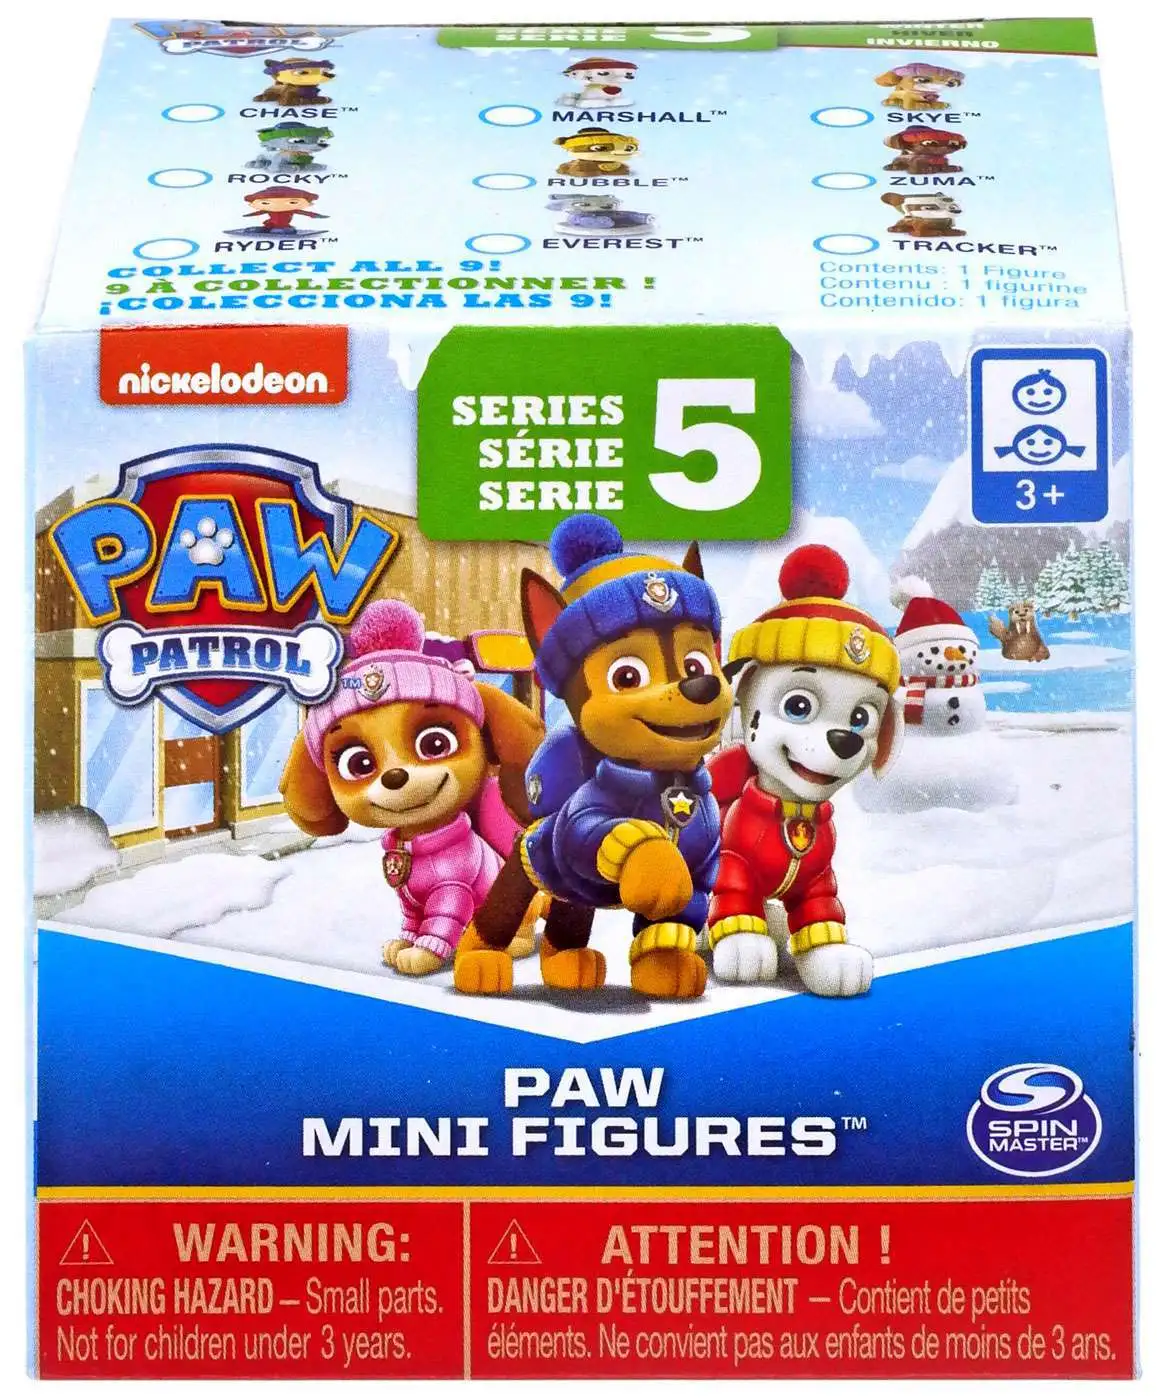 Volume Discount Available 2 or 5 Mini Figures Blind Box Paw Patrol Series 1 